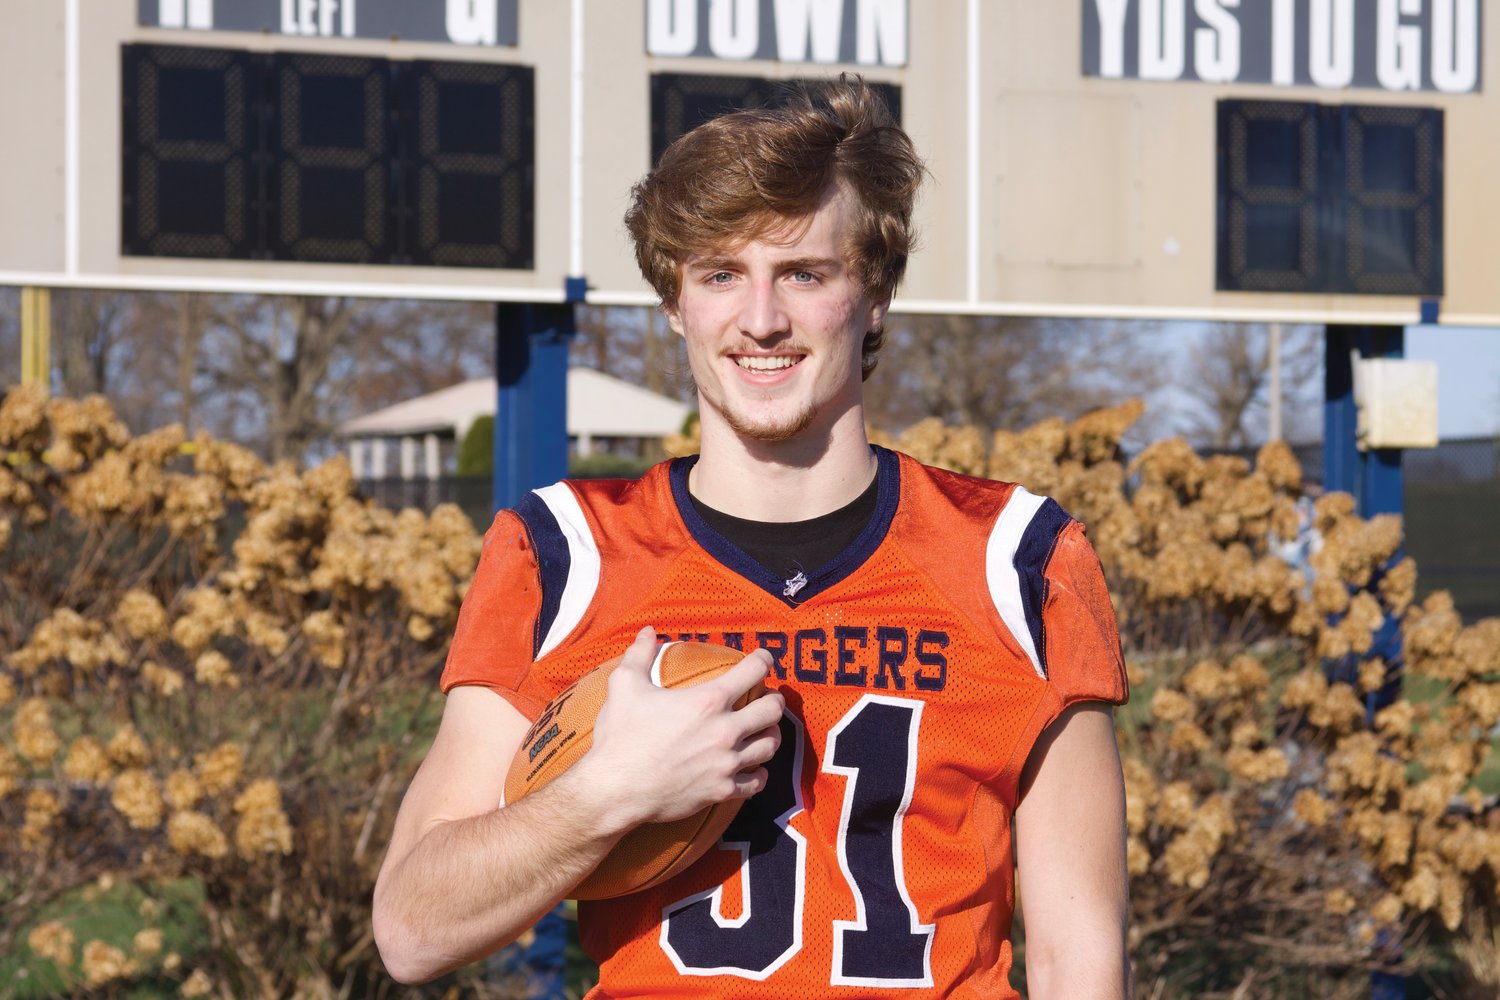 North Montgomery’s Zak Searle averaged over 100 yards per game rushing. The senior is the 2020 Journal Review Football Player of the Year.